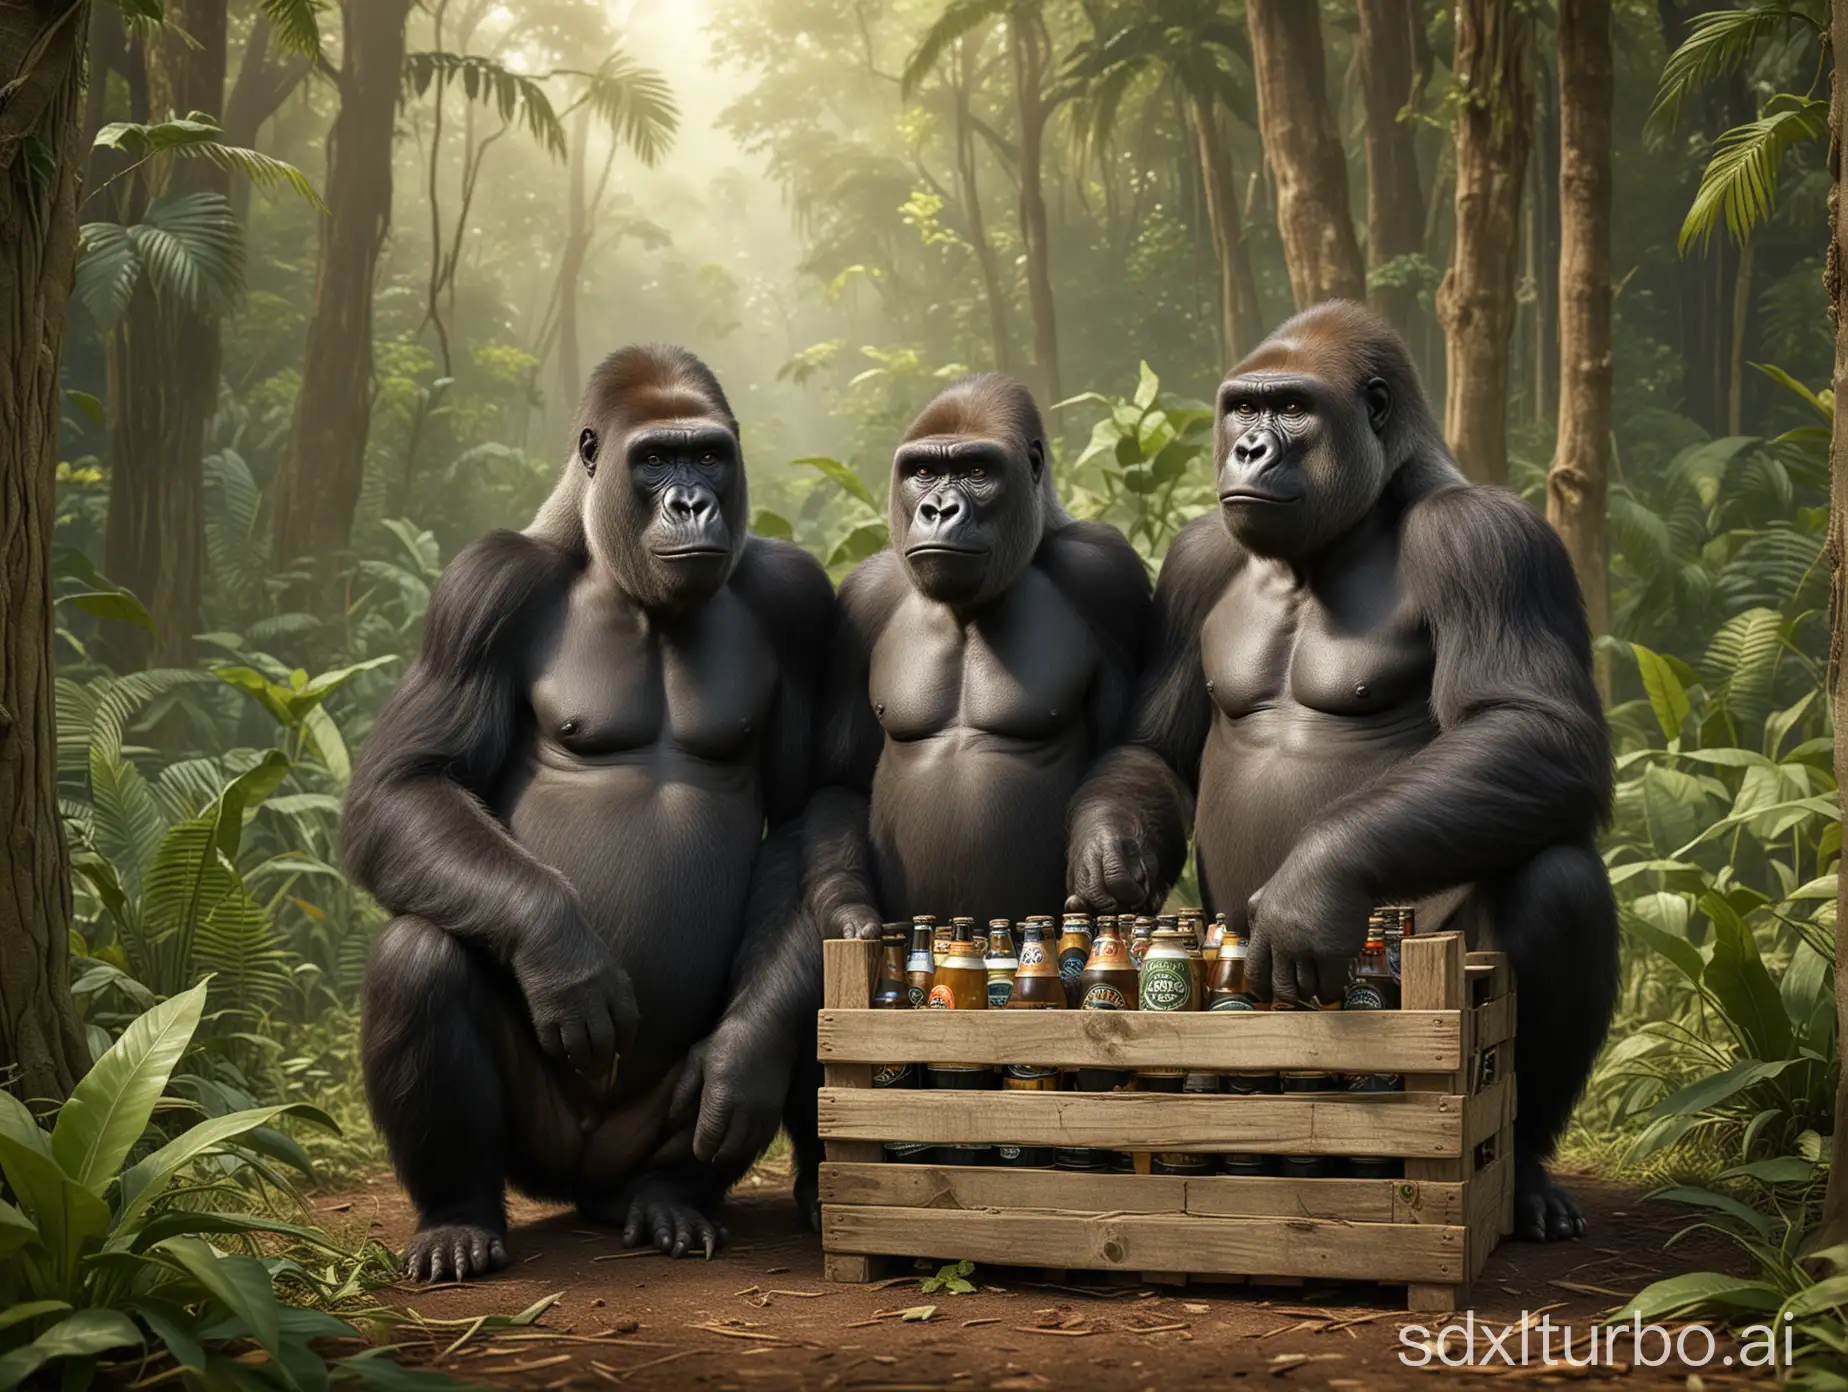 Fathers-Day-Celebration-Gorillas-Enjoying-Beer-in-Detailed-Jungle-Setting